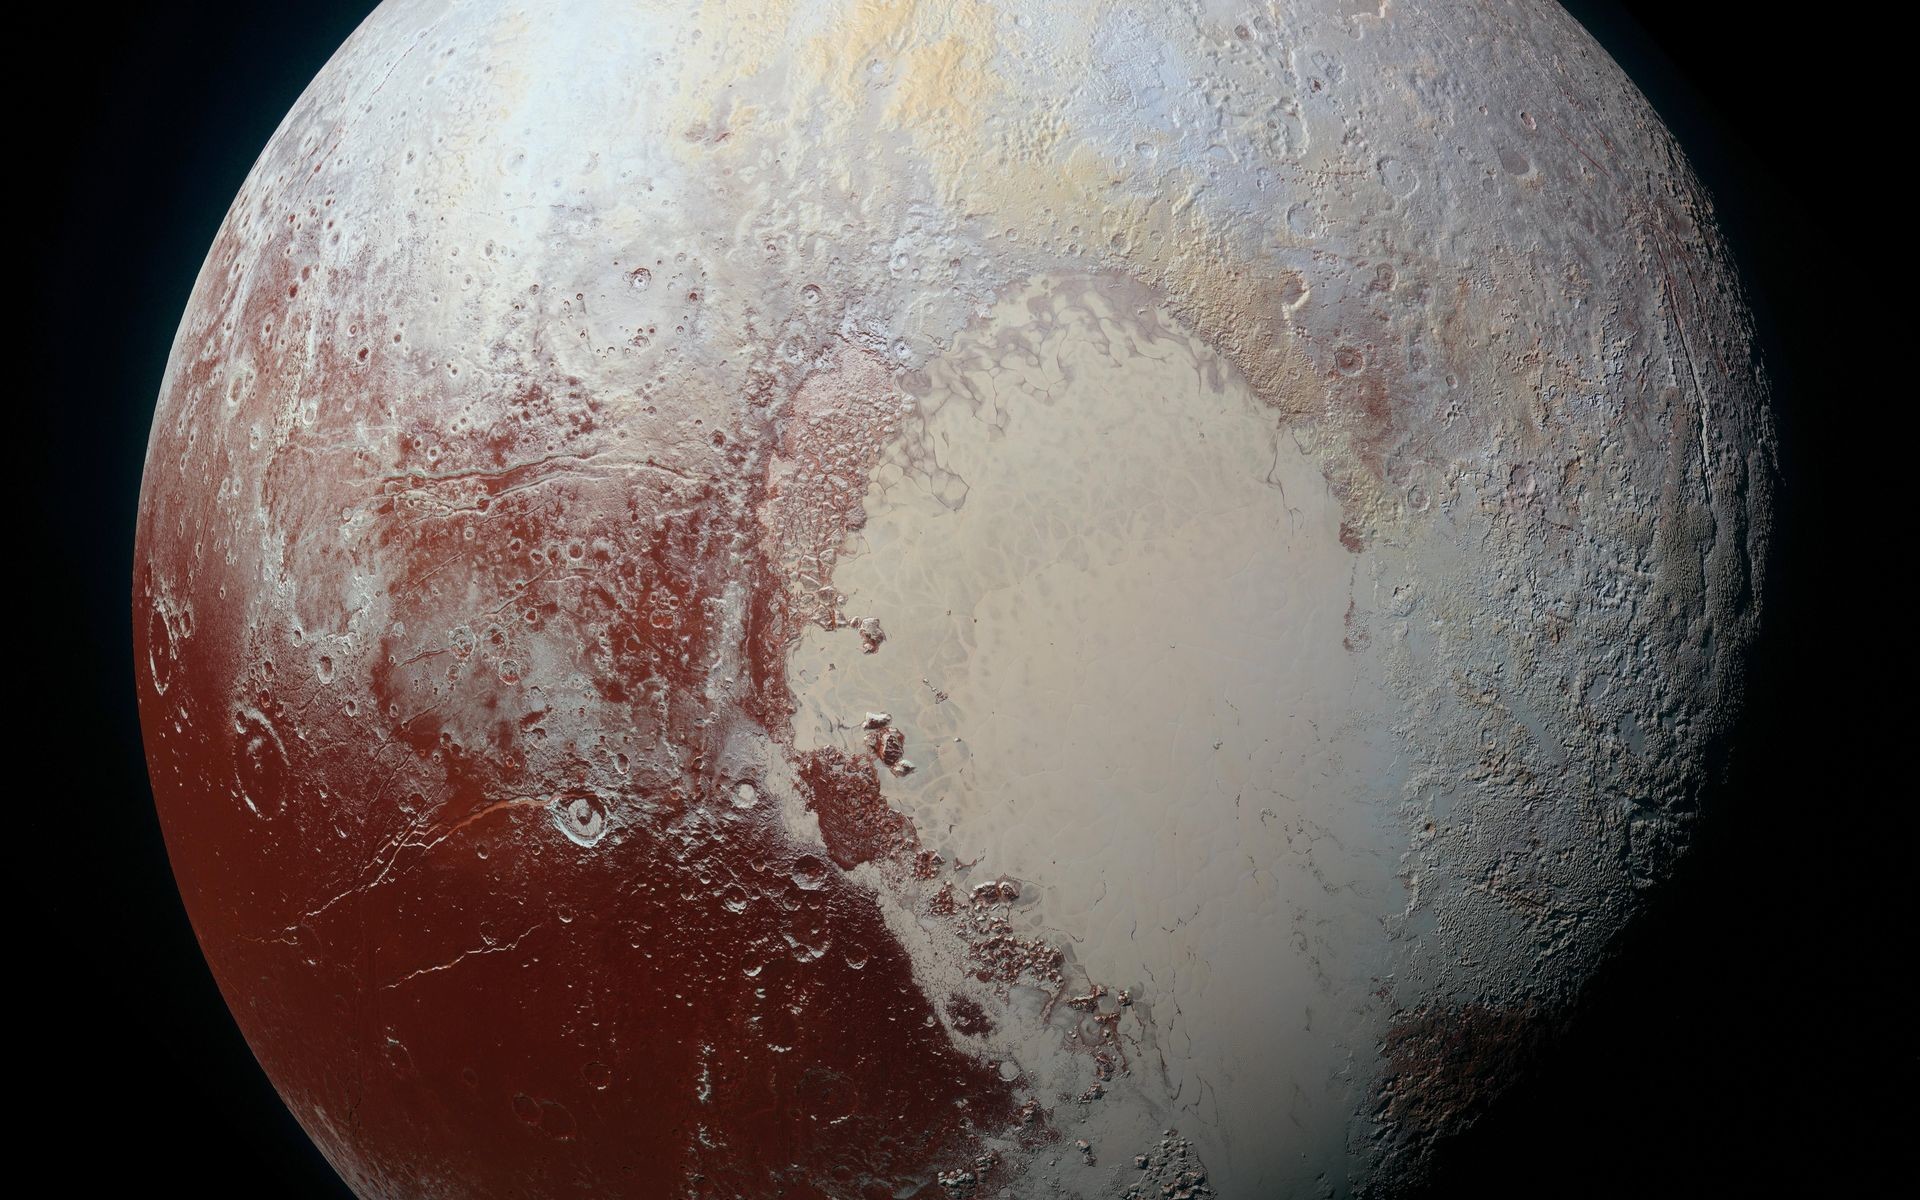 NASA's New Horizons spacecraft captured this high-resolution enhanced color  view of Pluto on July